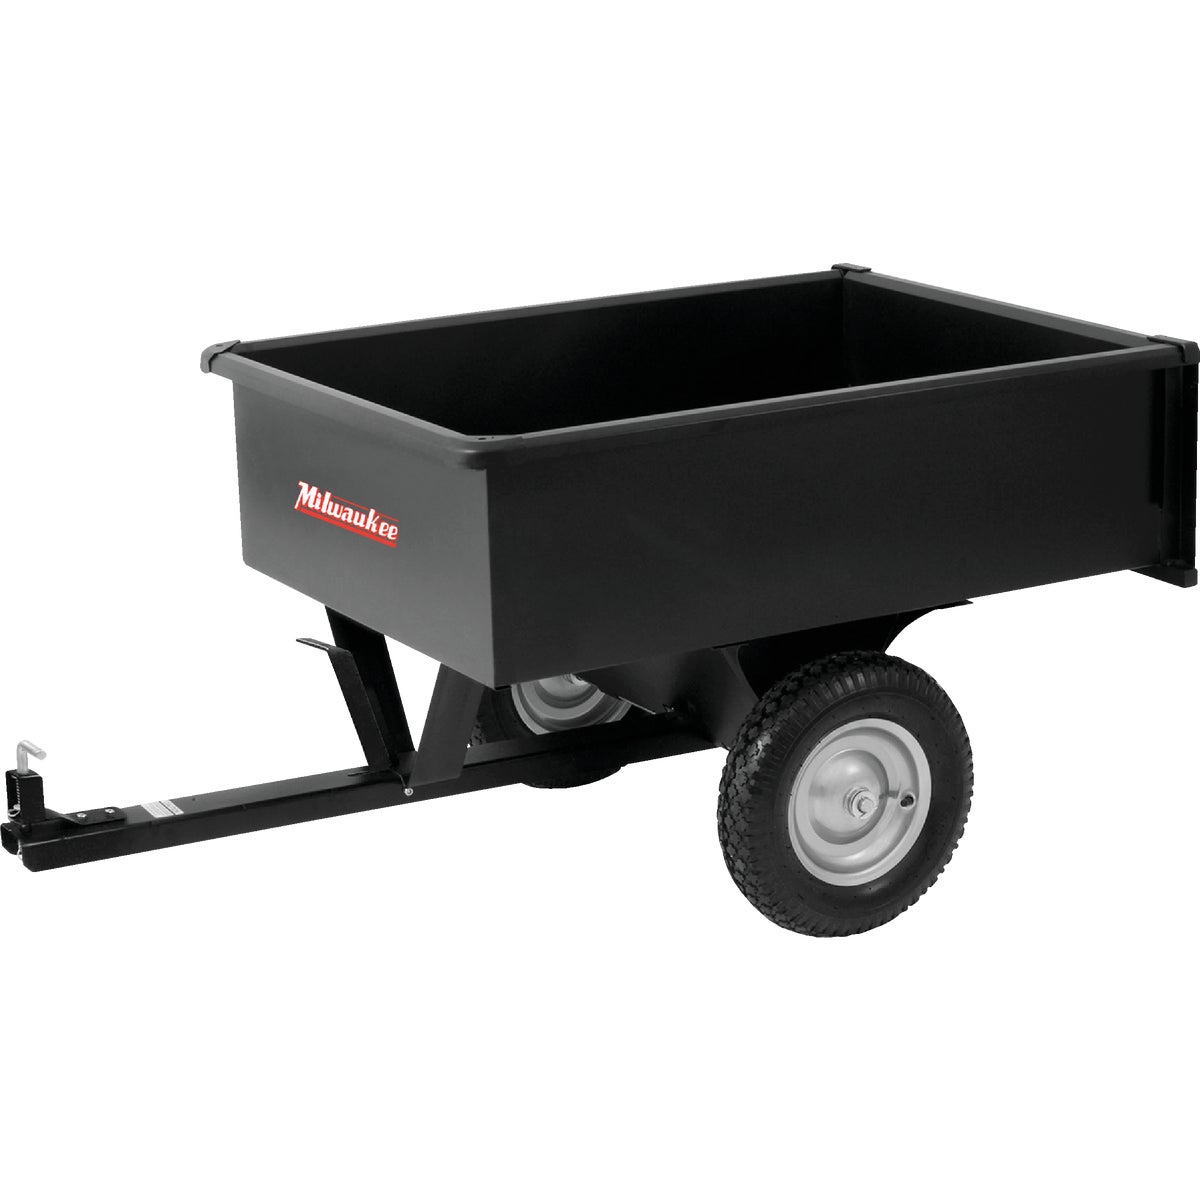 Item 705498, Trailing dump cart has a single lever dump release for quick and easy 